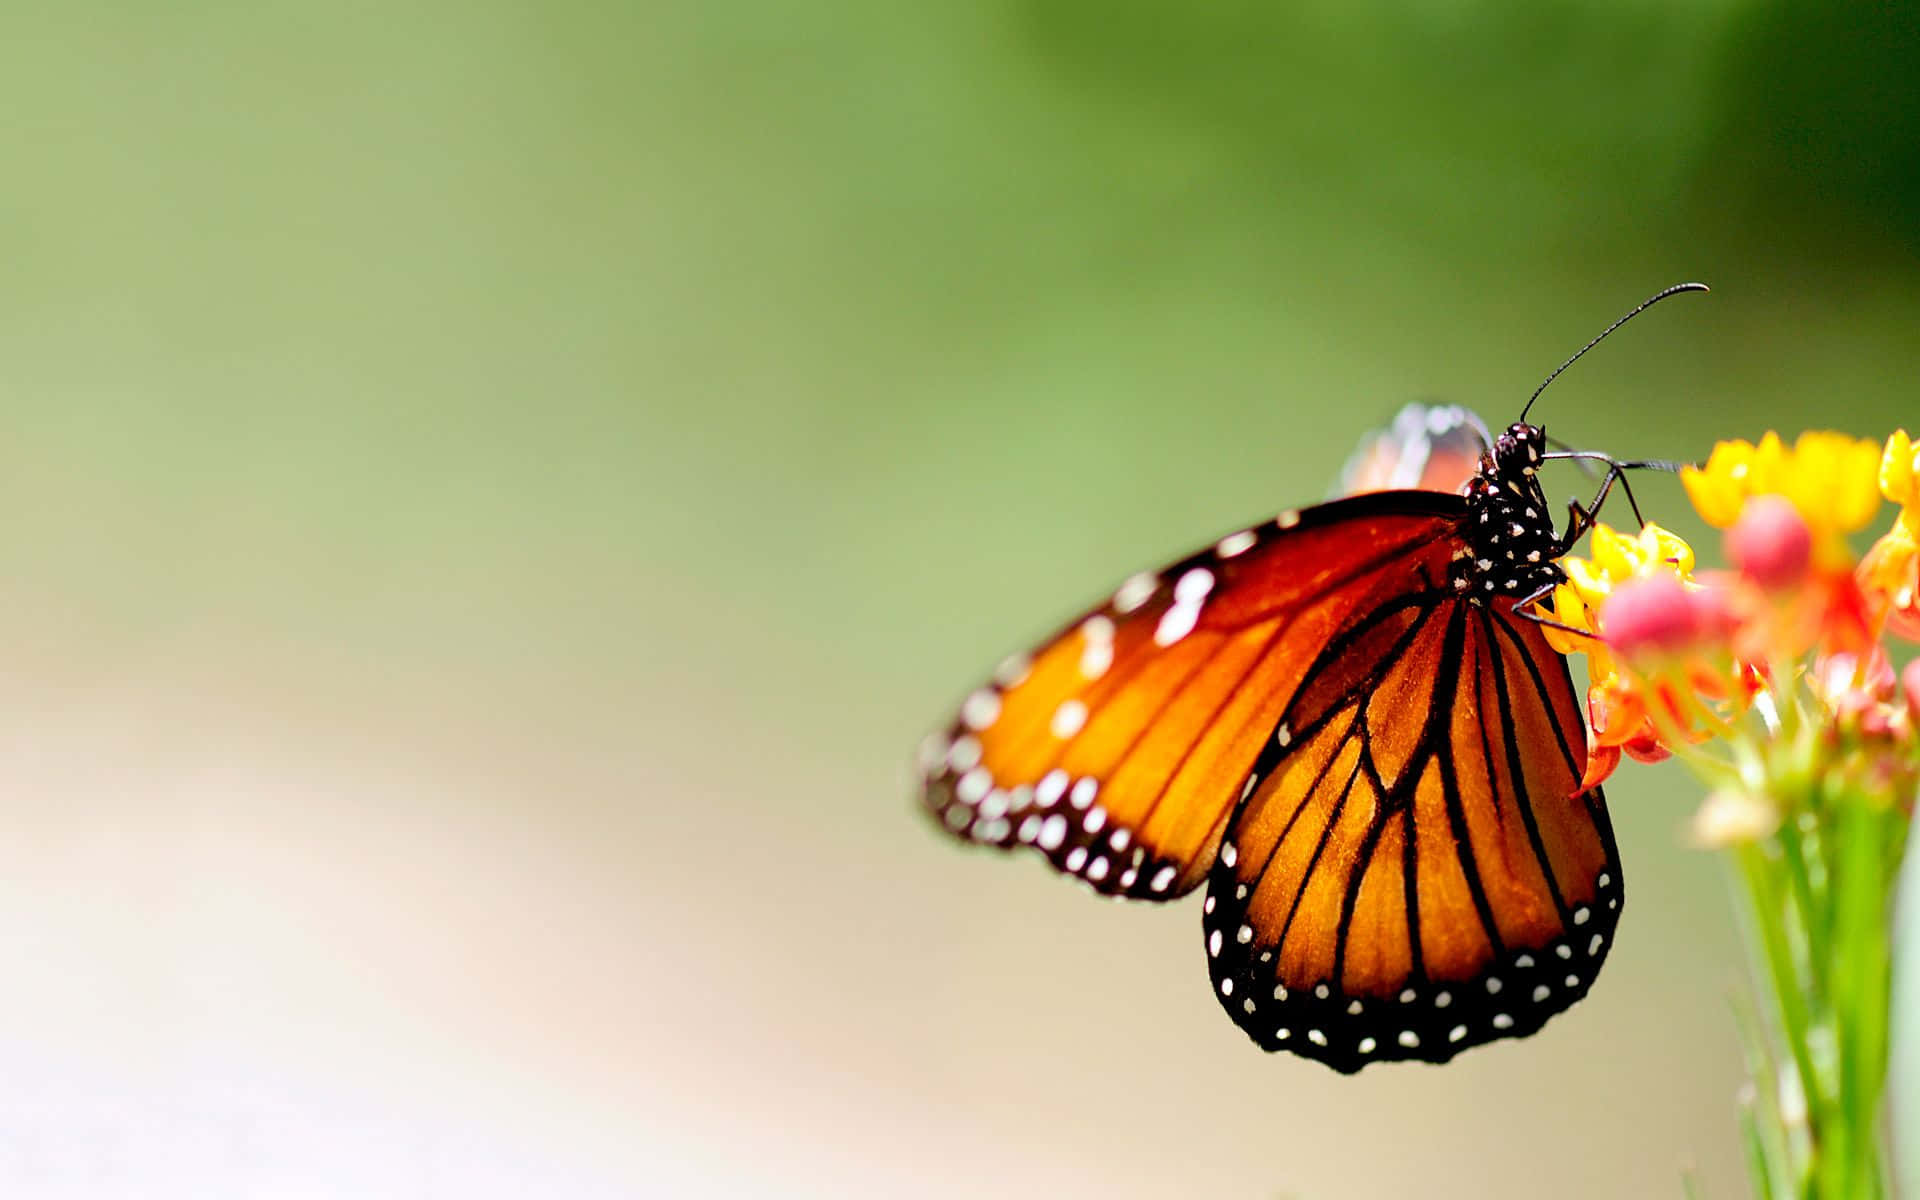 "A beautiful orange and black butterfly captured in nature" Wallpaper